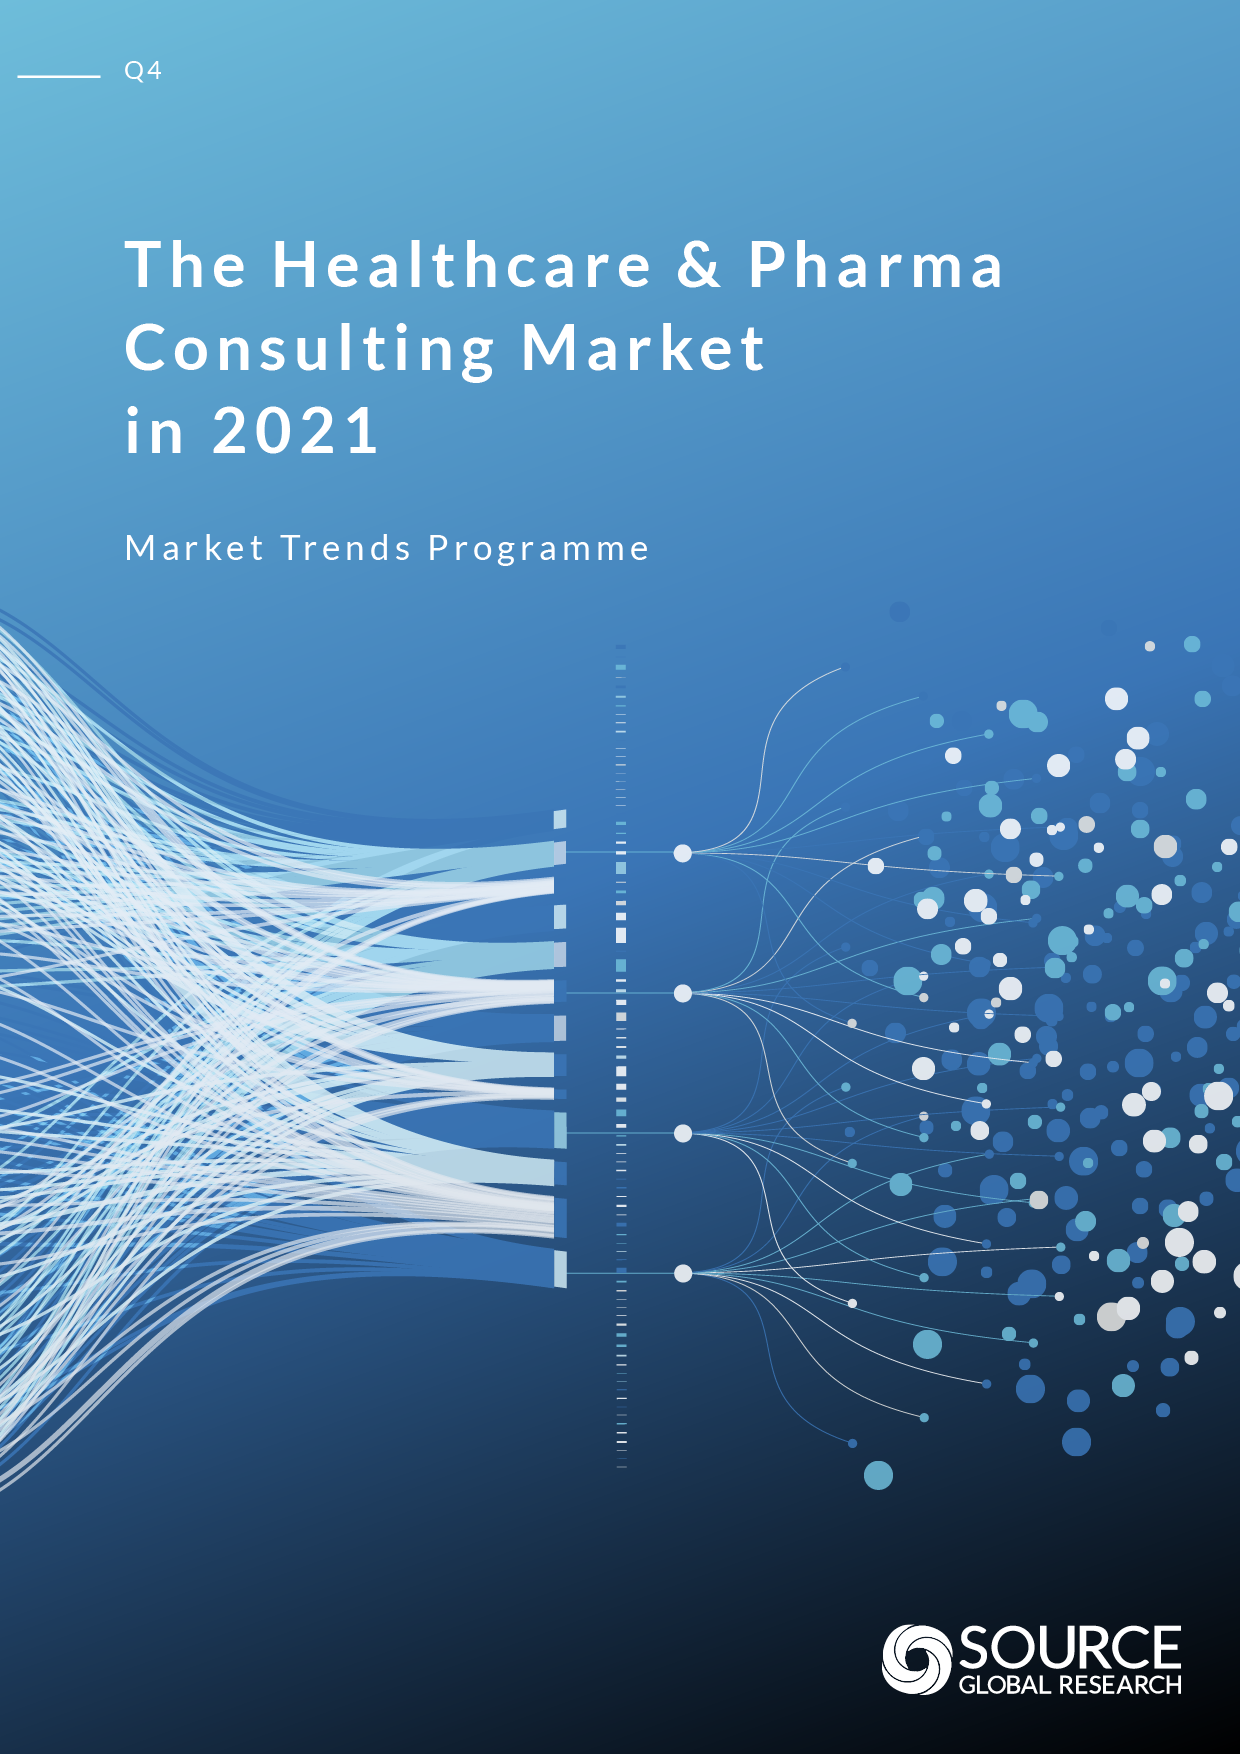 The Healthcare & Pharma Consulting Market in 2021 Source Global Research